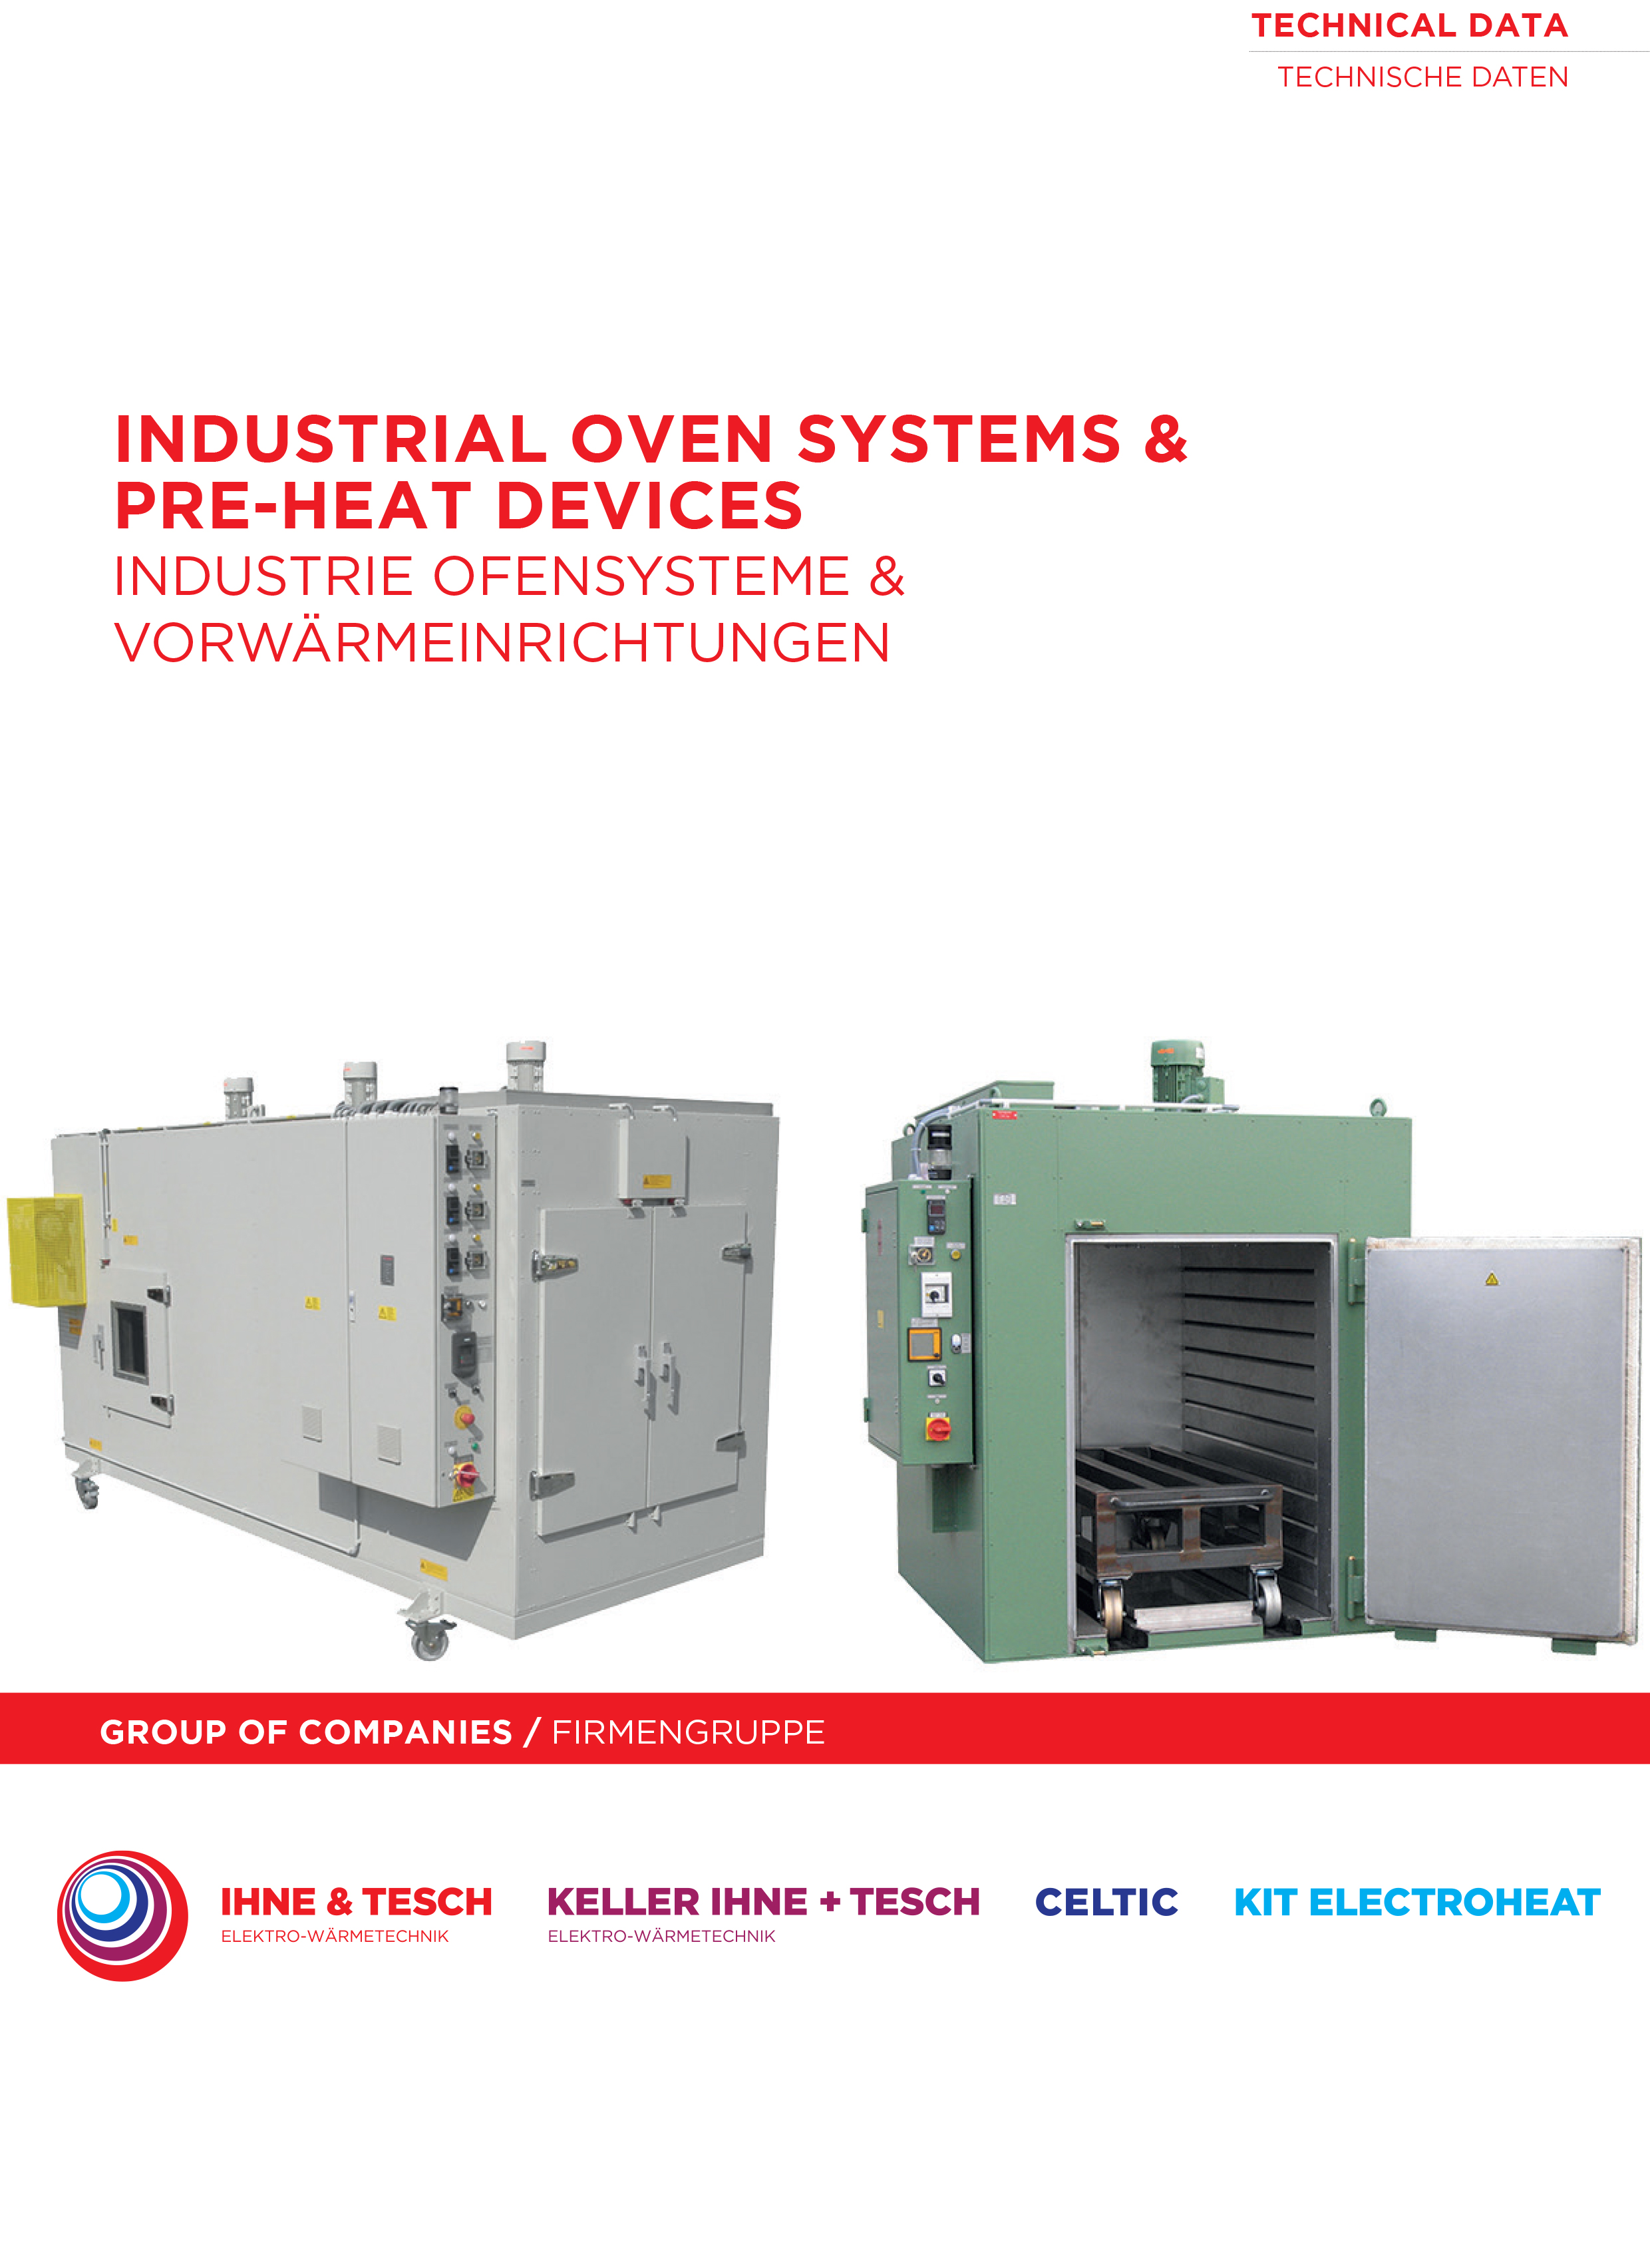 Industrial-Ovens-technical-data